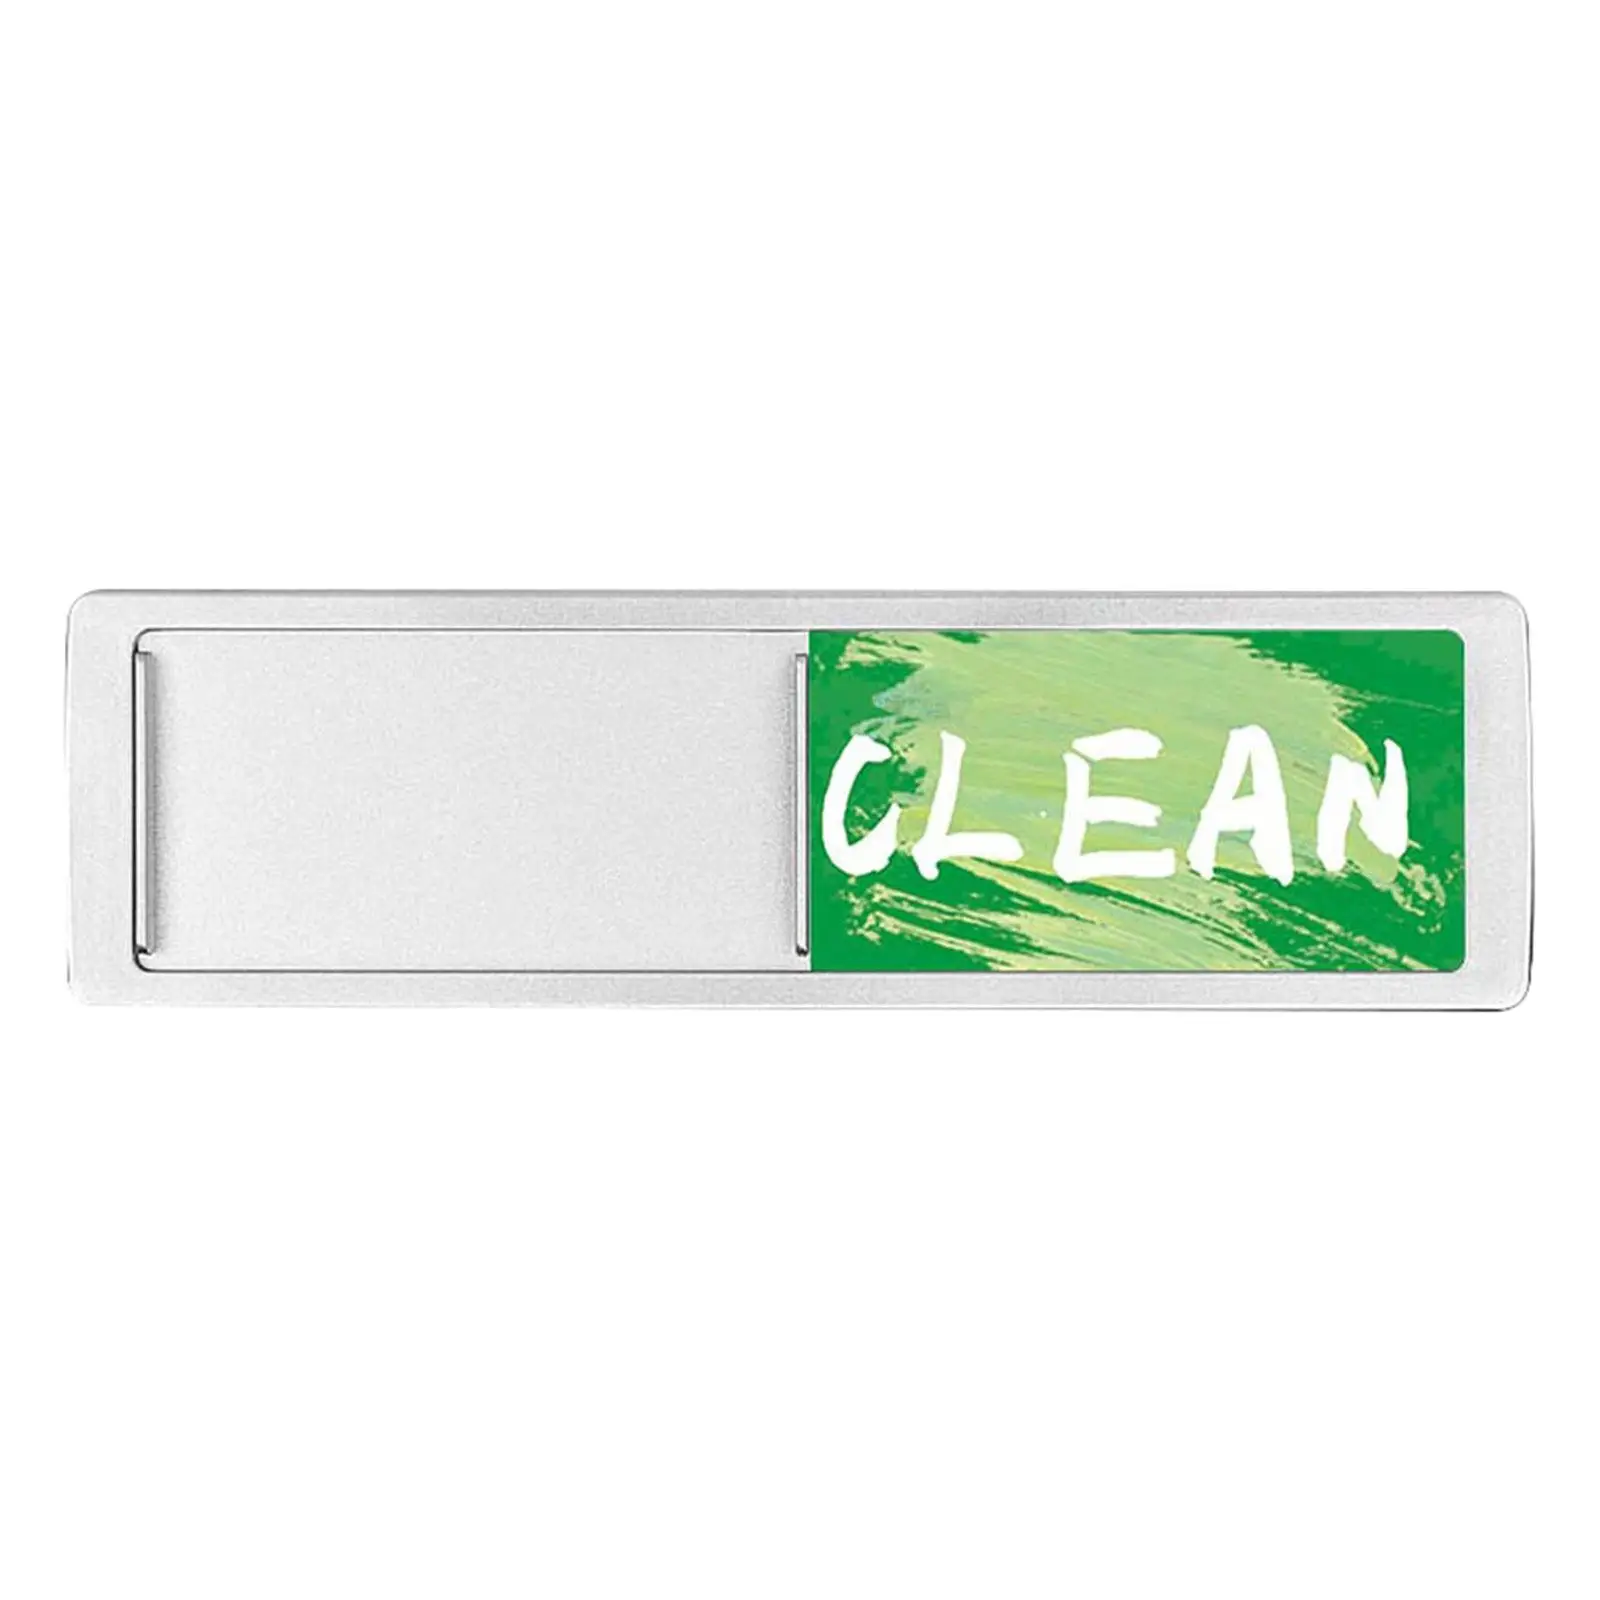 Double Sided Dishwasher Clean Dirty Sign Indicator Dishwasher Cleaning Indicator Portable for Washing Machine Laundry Kitchen